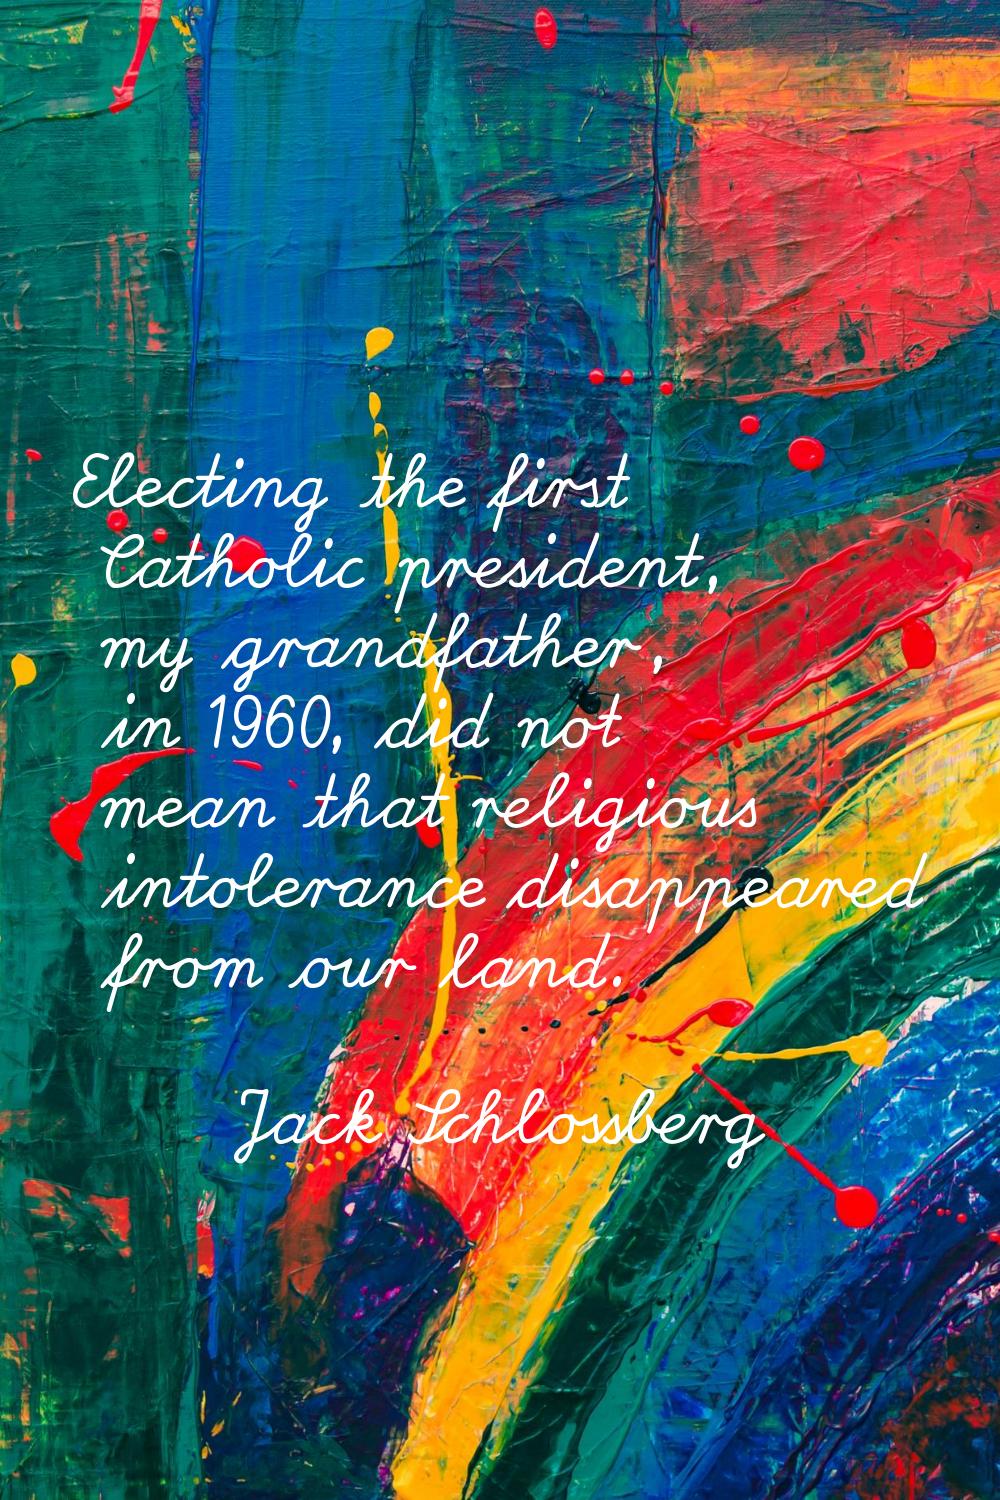 Electing the first Catholic president, my grandfather, in 1960, did not mean that religious intoler